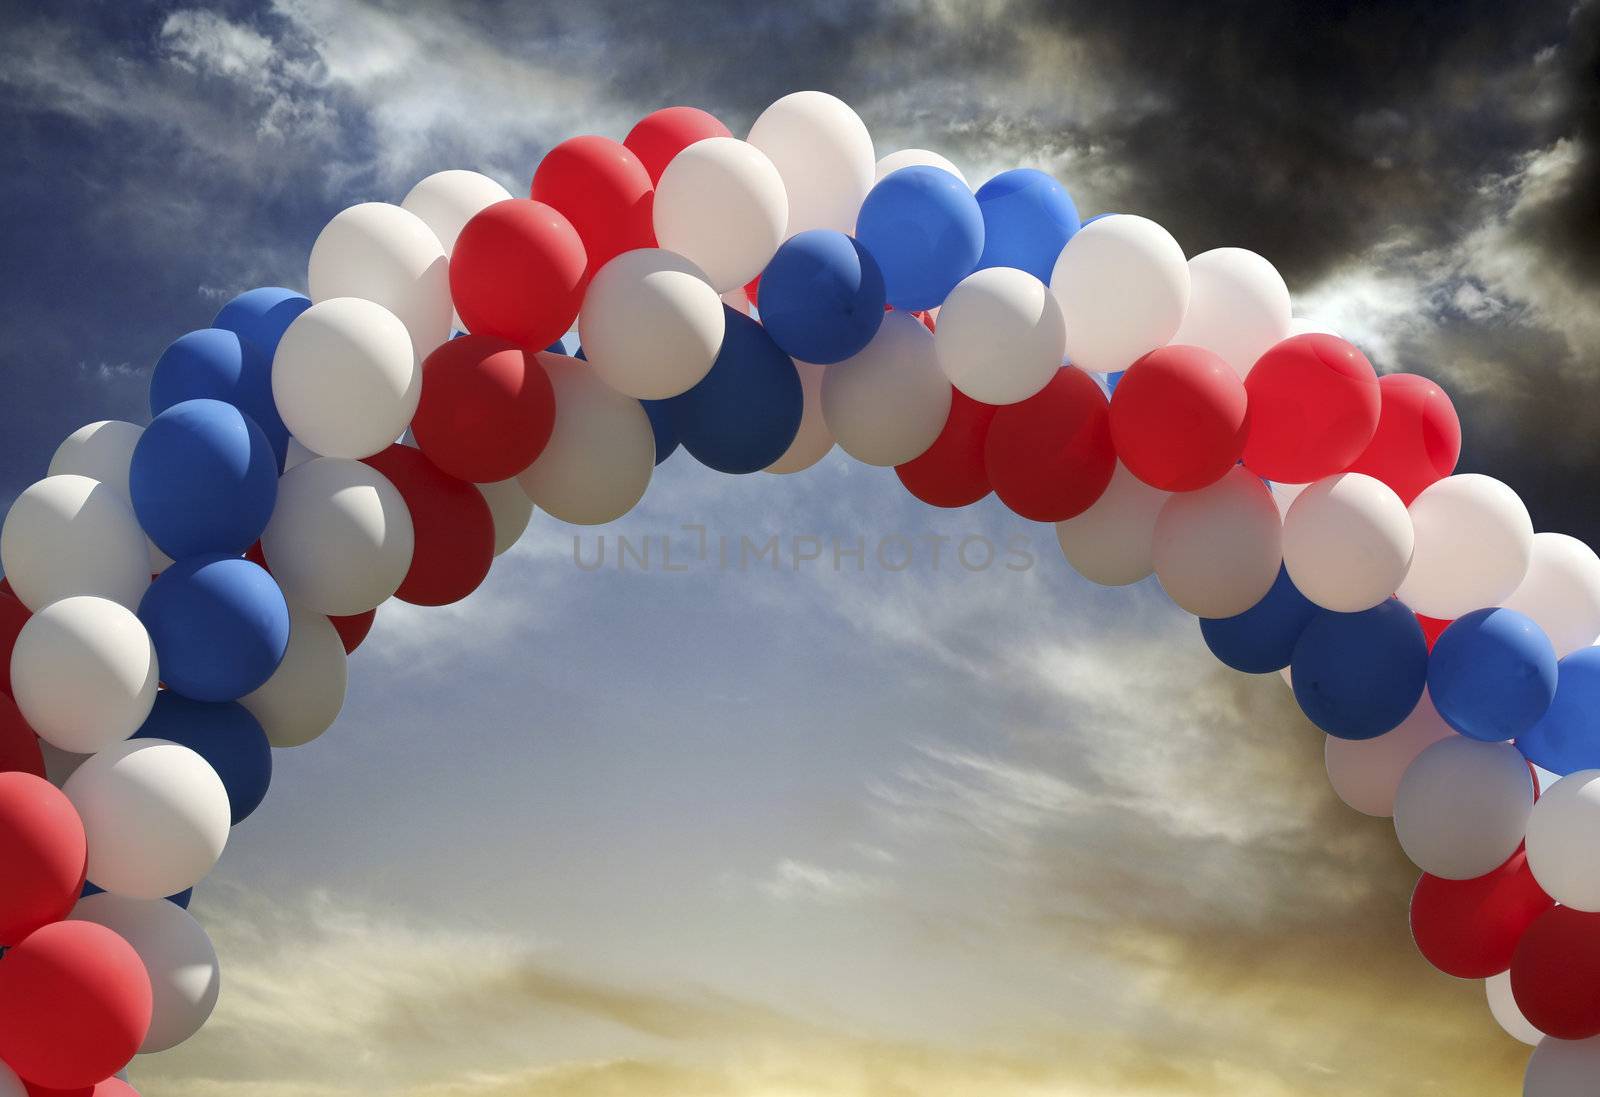 Archway of balloons with evening sky background, digital picture that is great as a photographer's prop for isolated image insertion